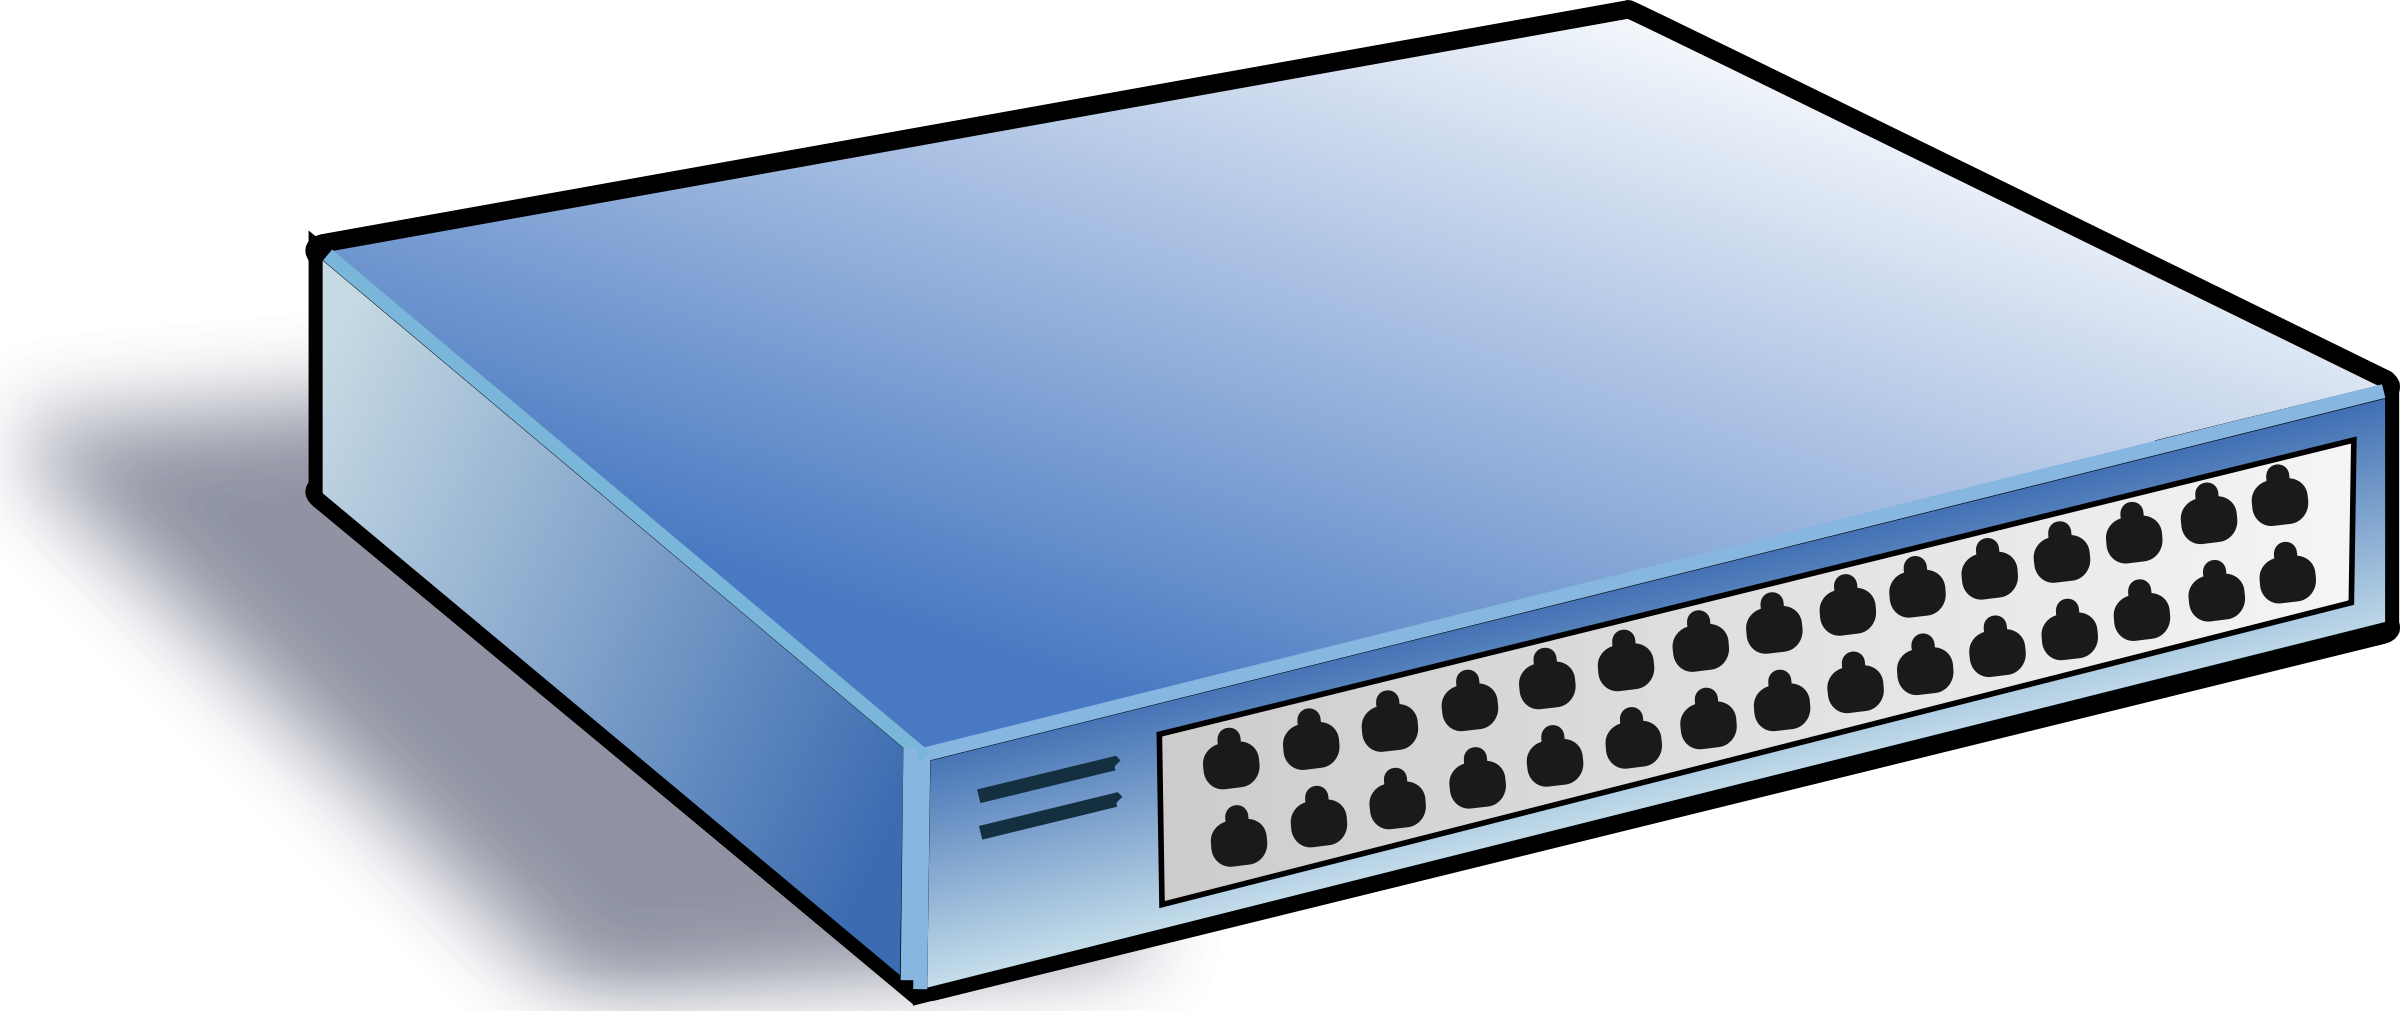 free clipart network switch - photo #19